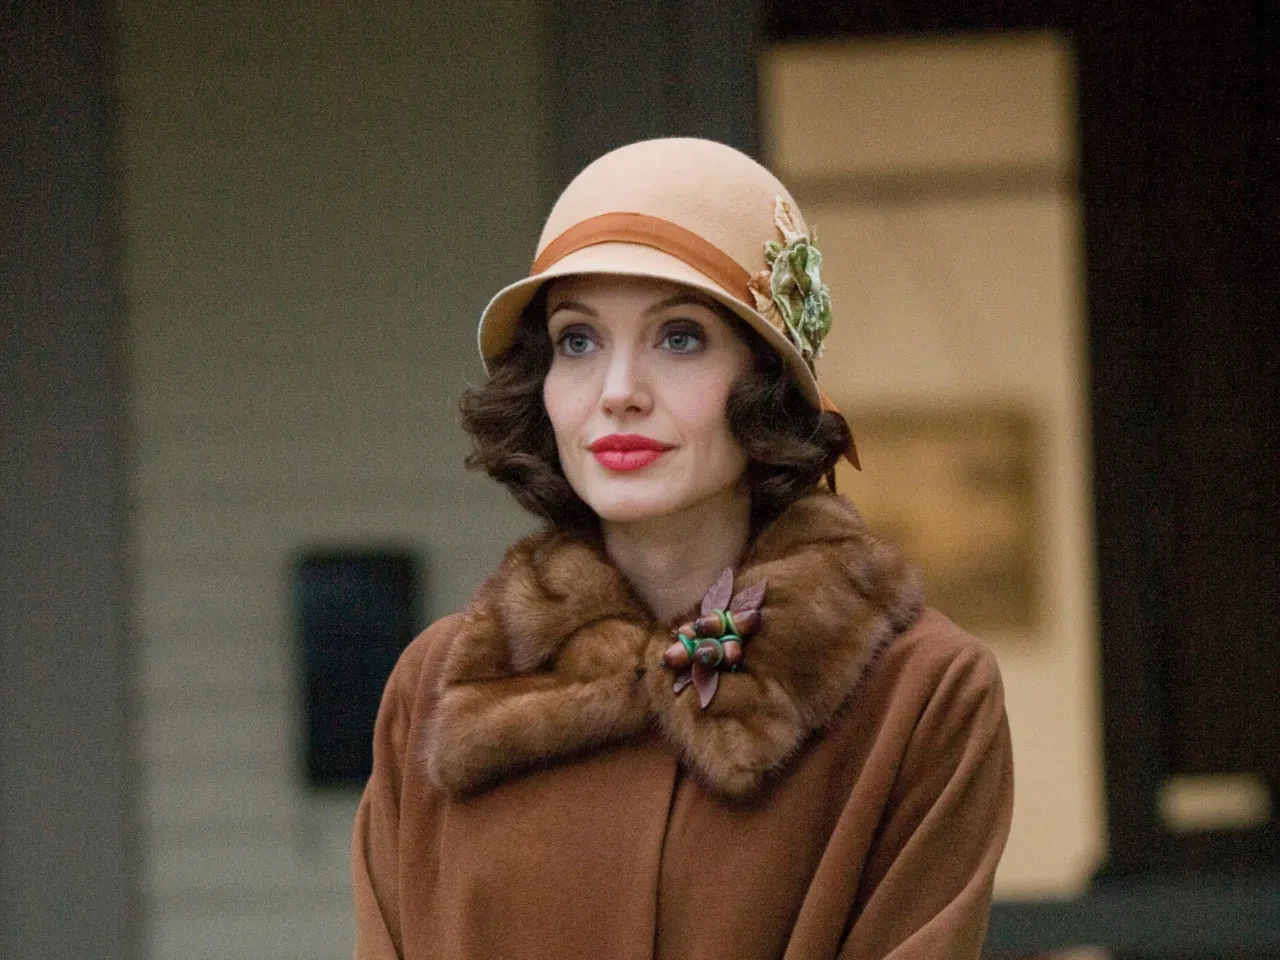 Angelina Jolie in a still from Changeling